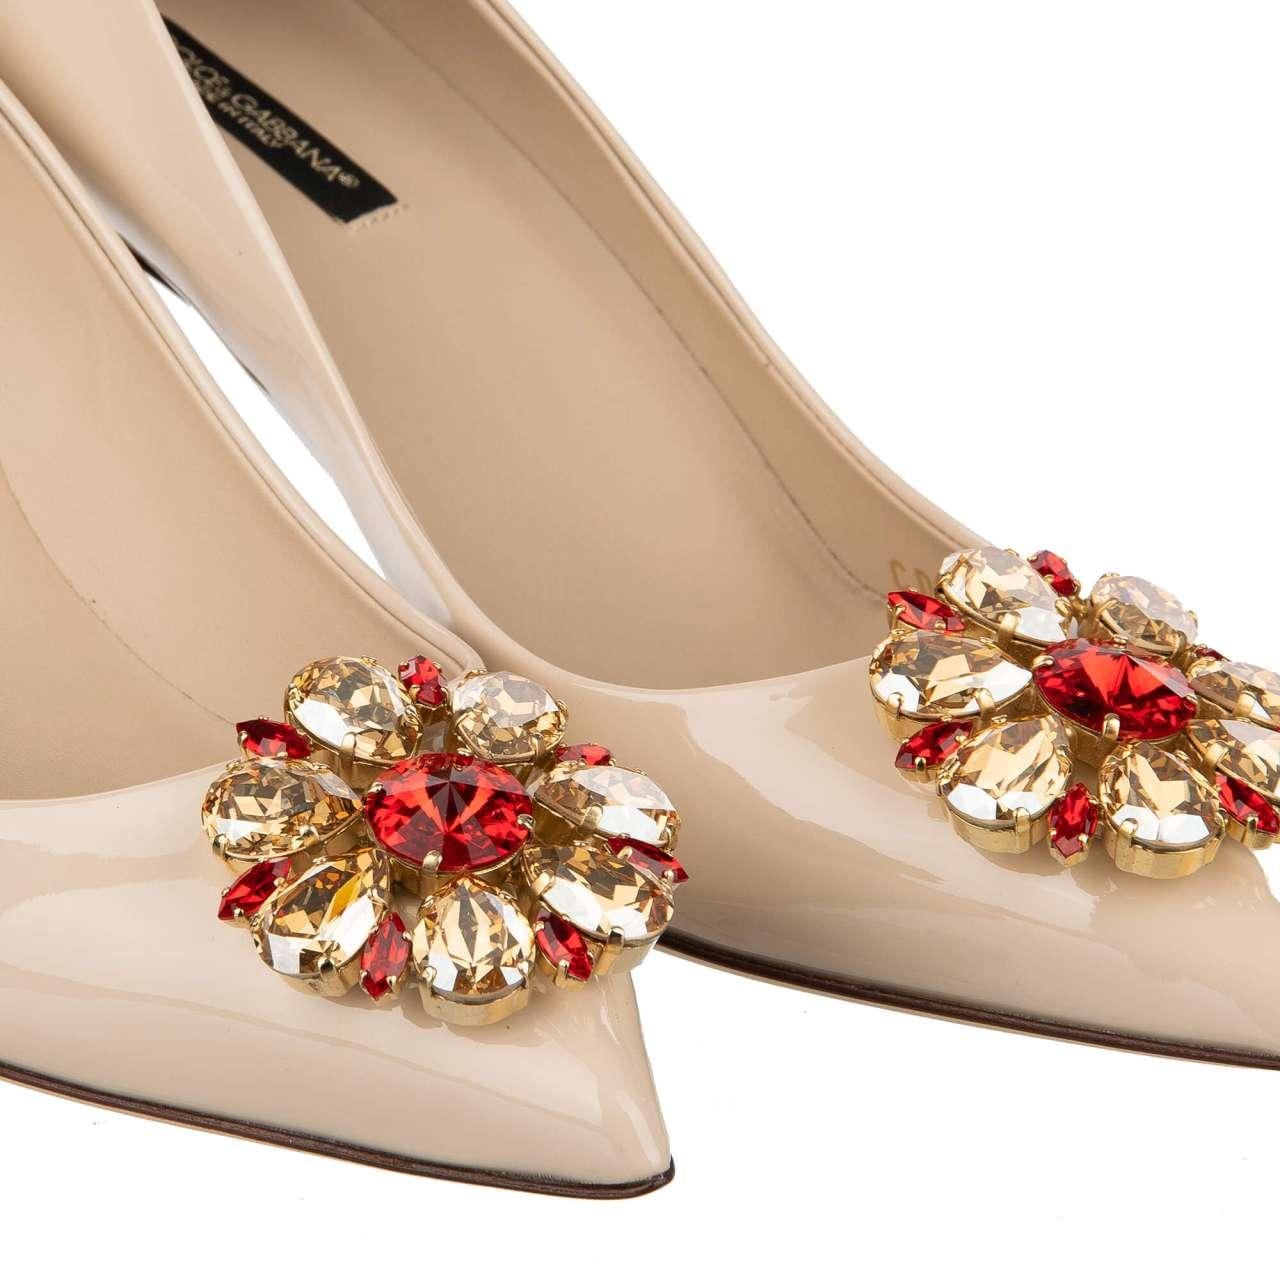 - Pointed patent leather Pumps BELLUCCI with crystals brooch in beige, red and gold by DOLCE & GABBANA - New with Box - MADE IN ITALY - Former RRP: EUR 725 - Crystals brooch in front - Model: CD0693-B1471-80011 - Material: 100% Calfskin - Inner